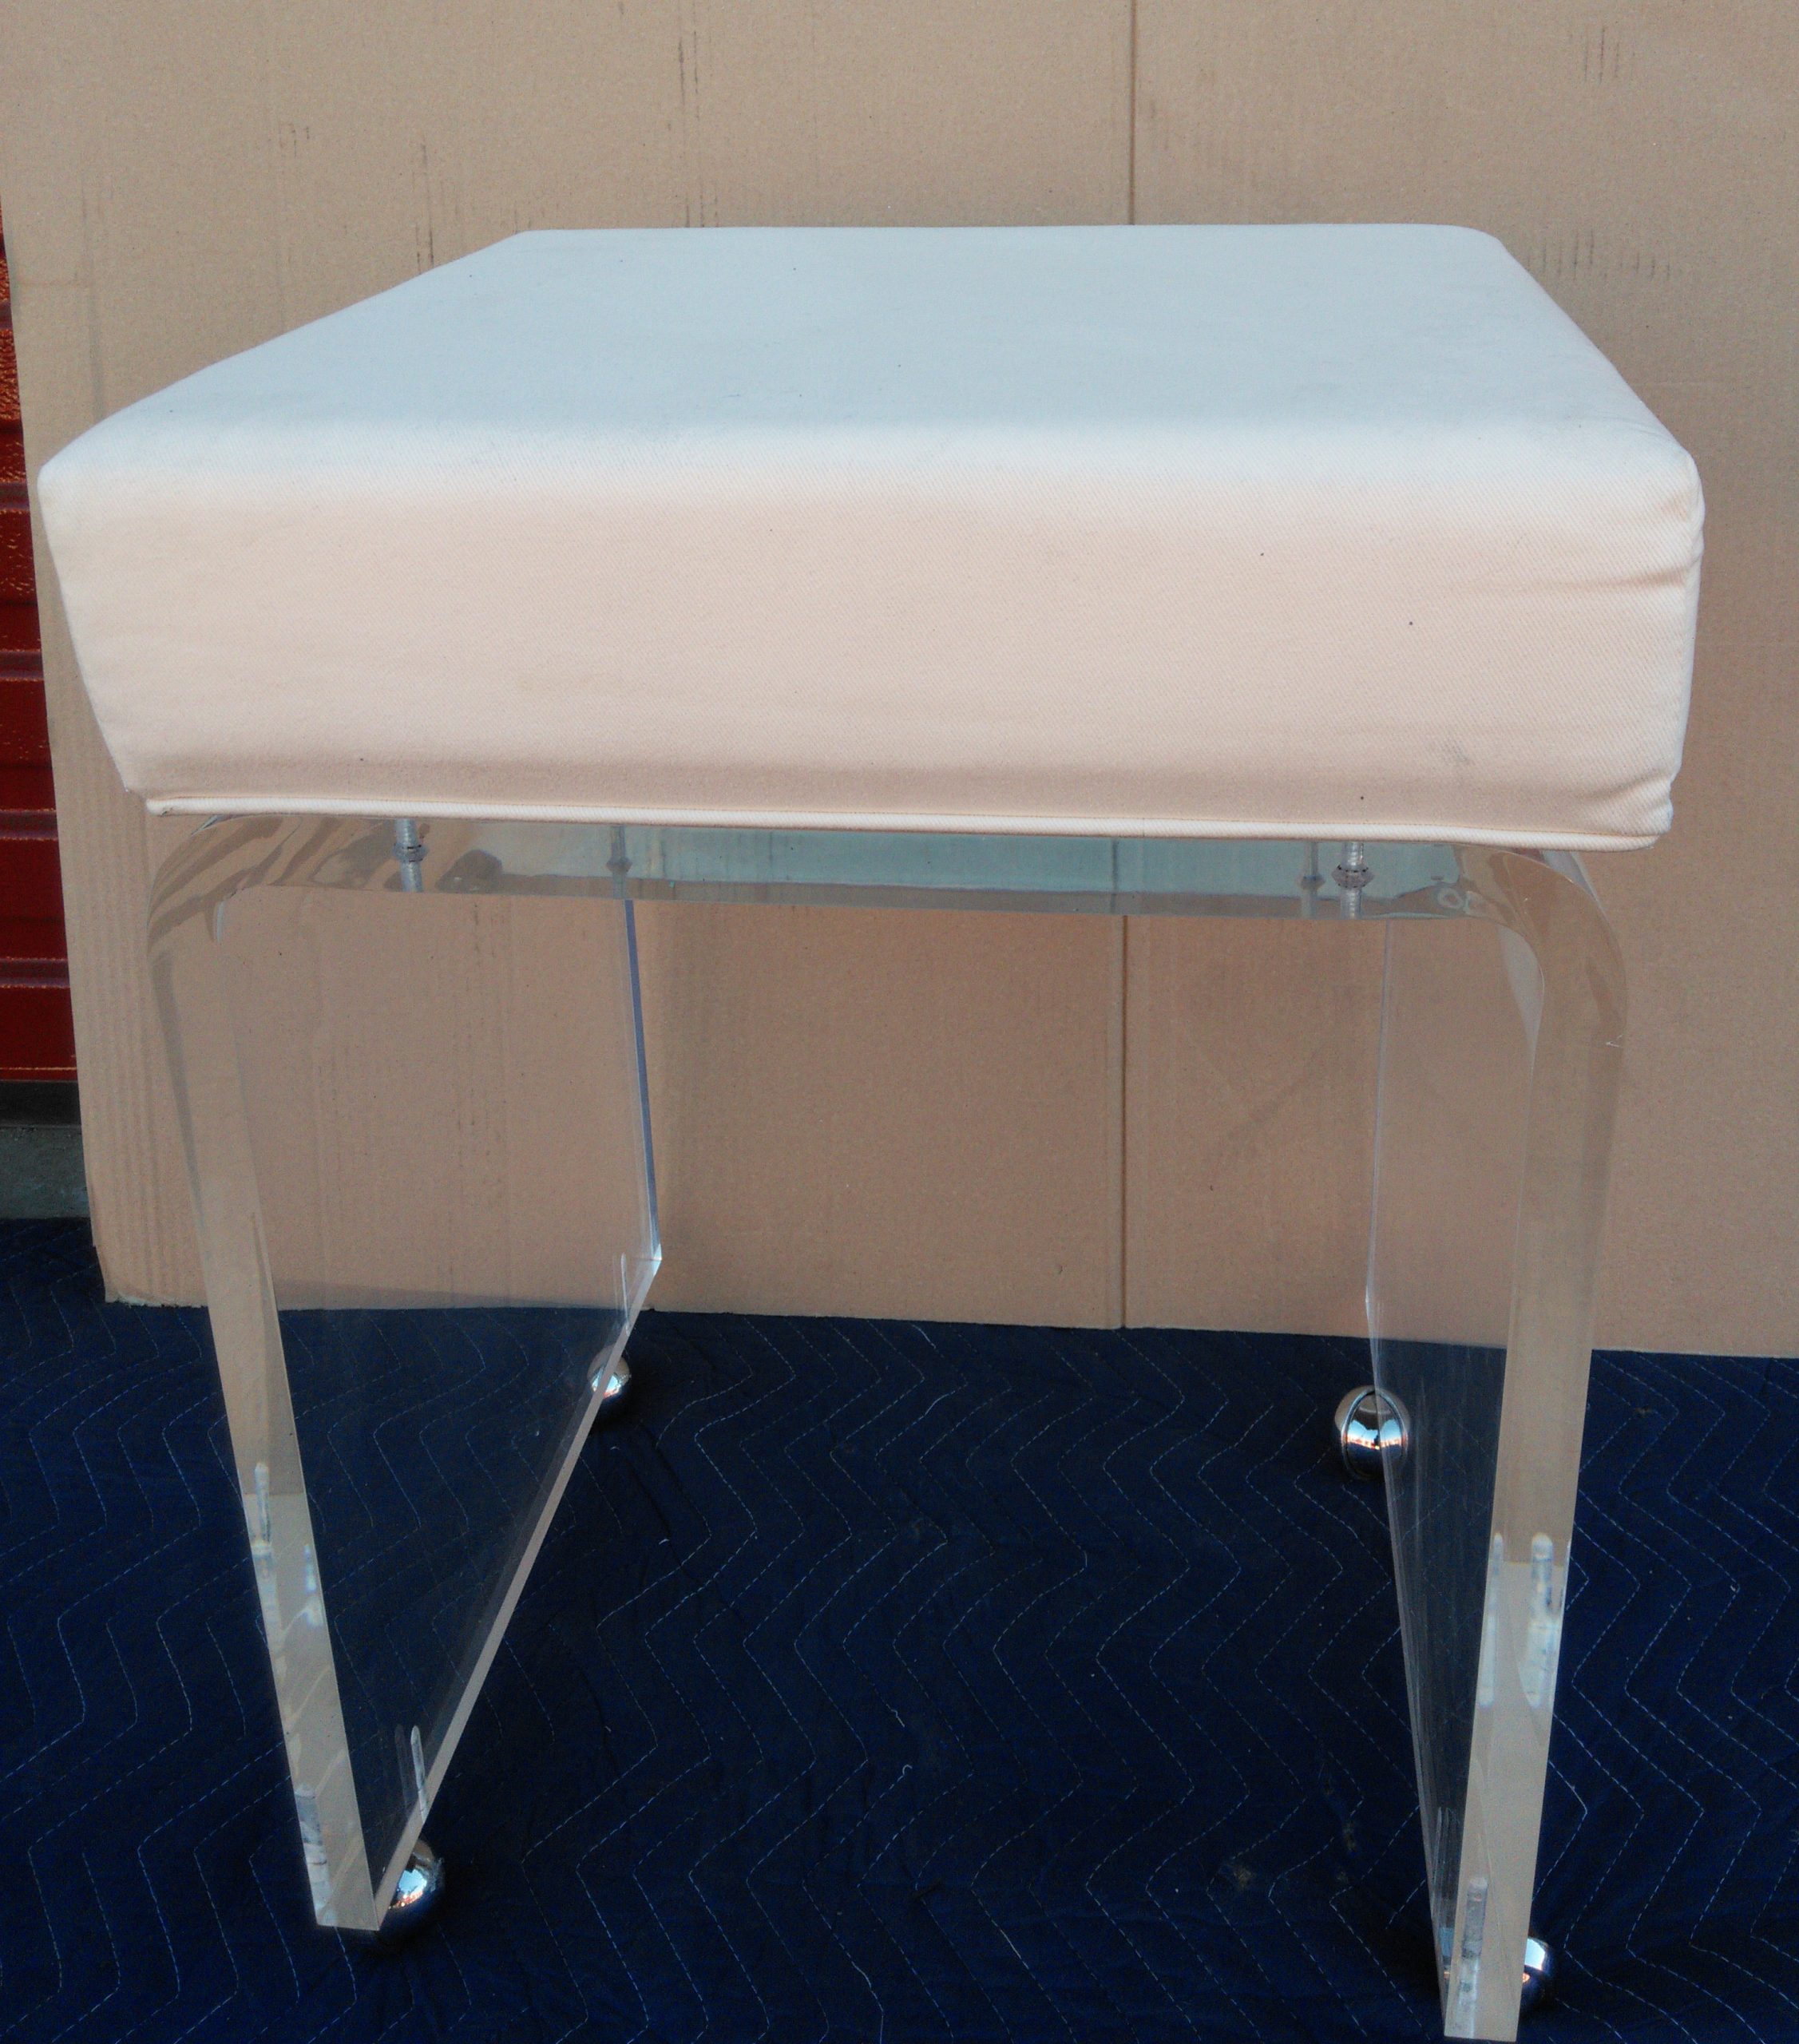 Venta Vanity Stool With Casters En, Bathroom Vanity Benches And Stools